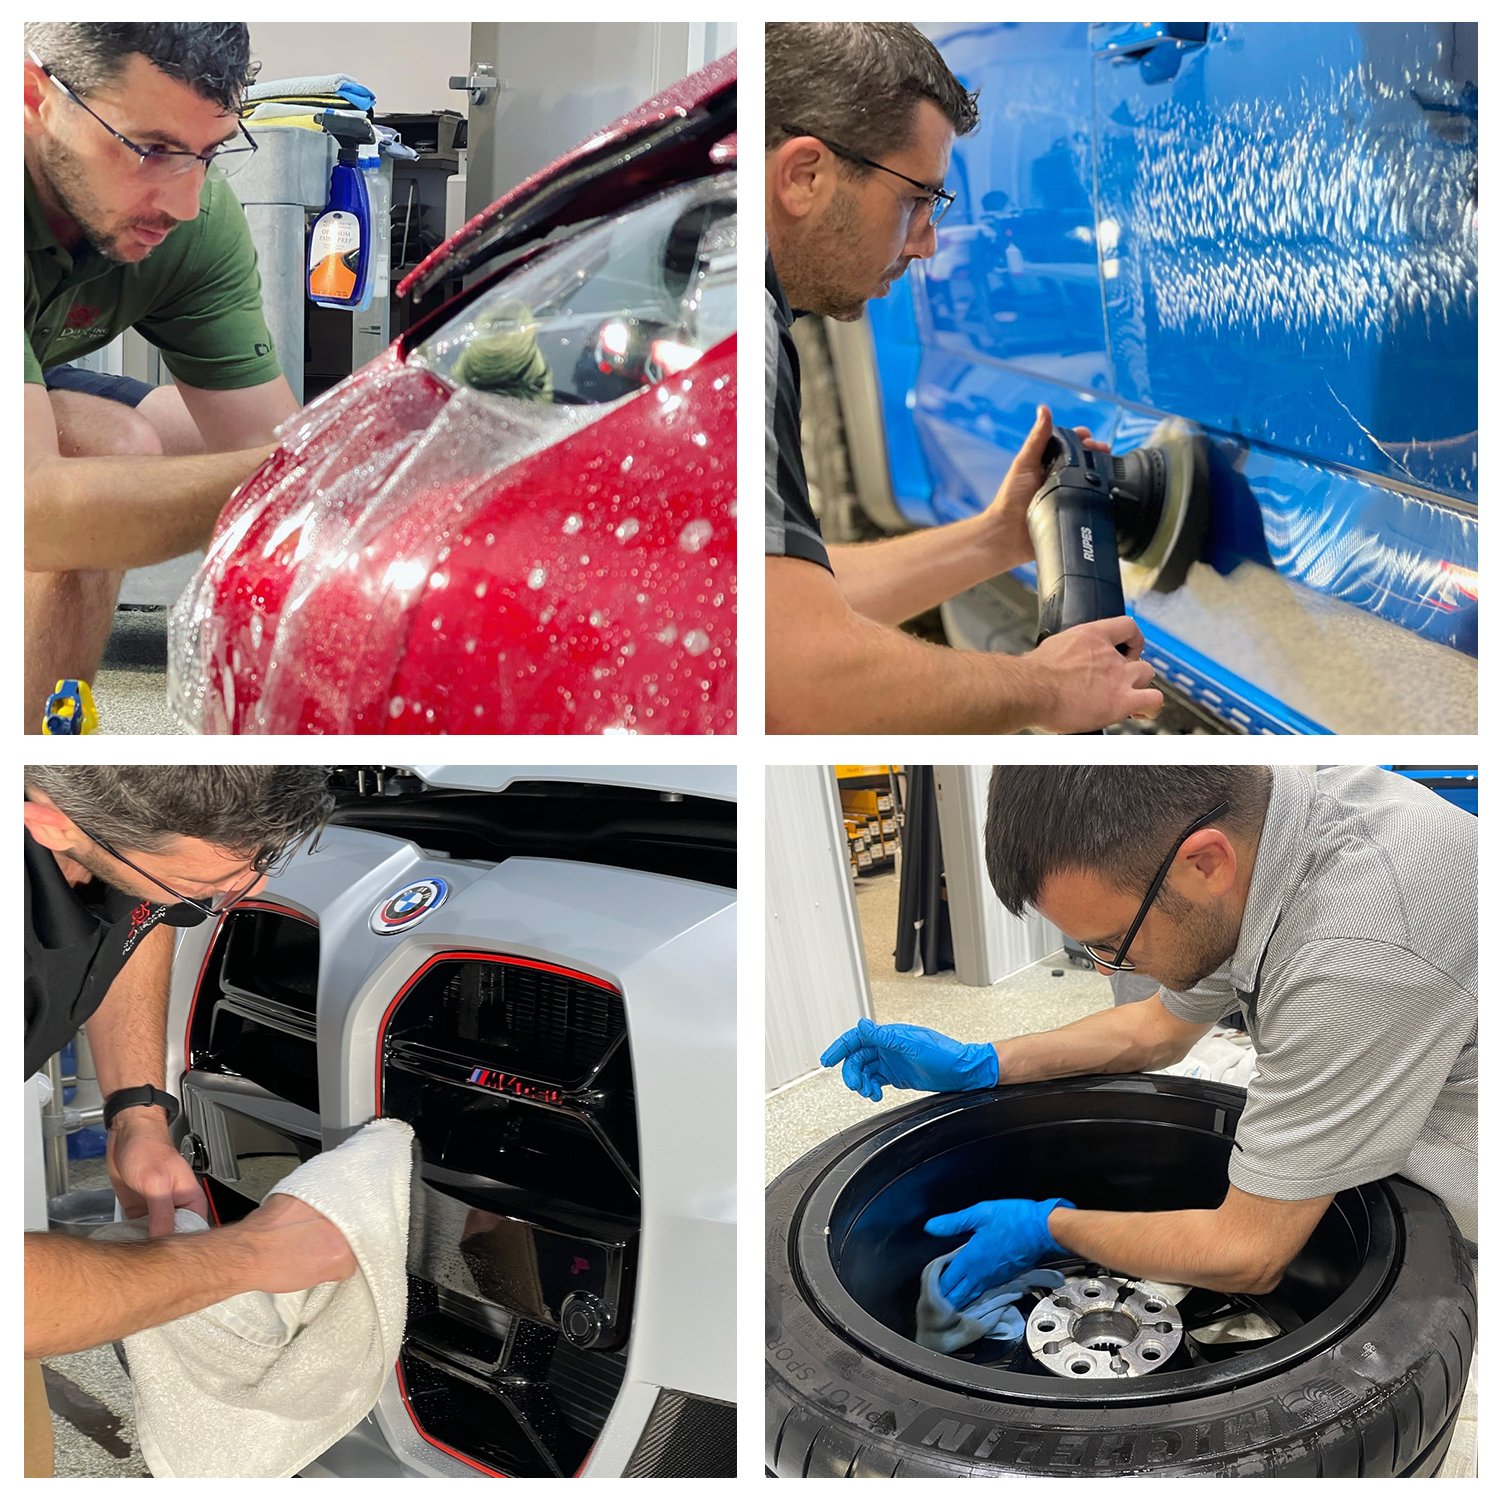 Paint correction, ceramic coating and paint protection film can lock in a better-than-factory shine and protect your vehicle from damage, especially when completed as a package ✨

#rosedetailing #paintcorrection #ceramiccoating #PPF